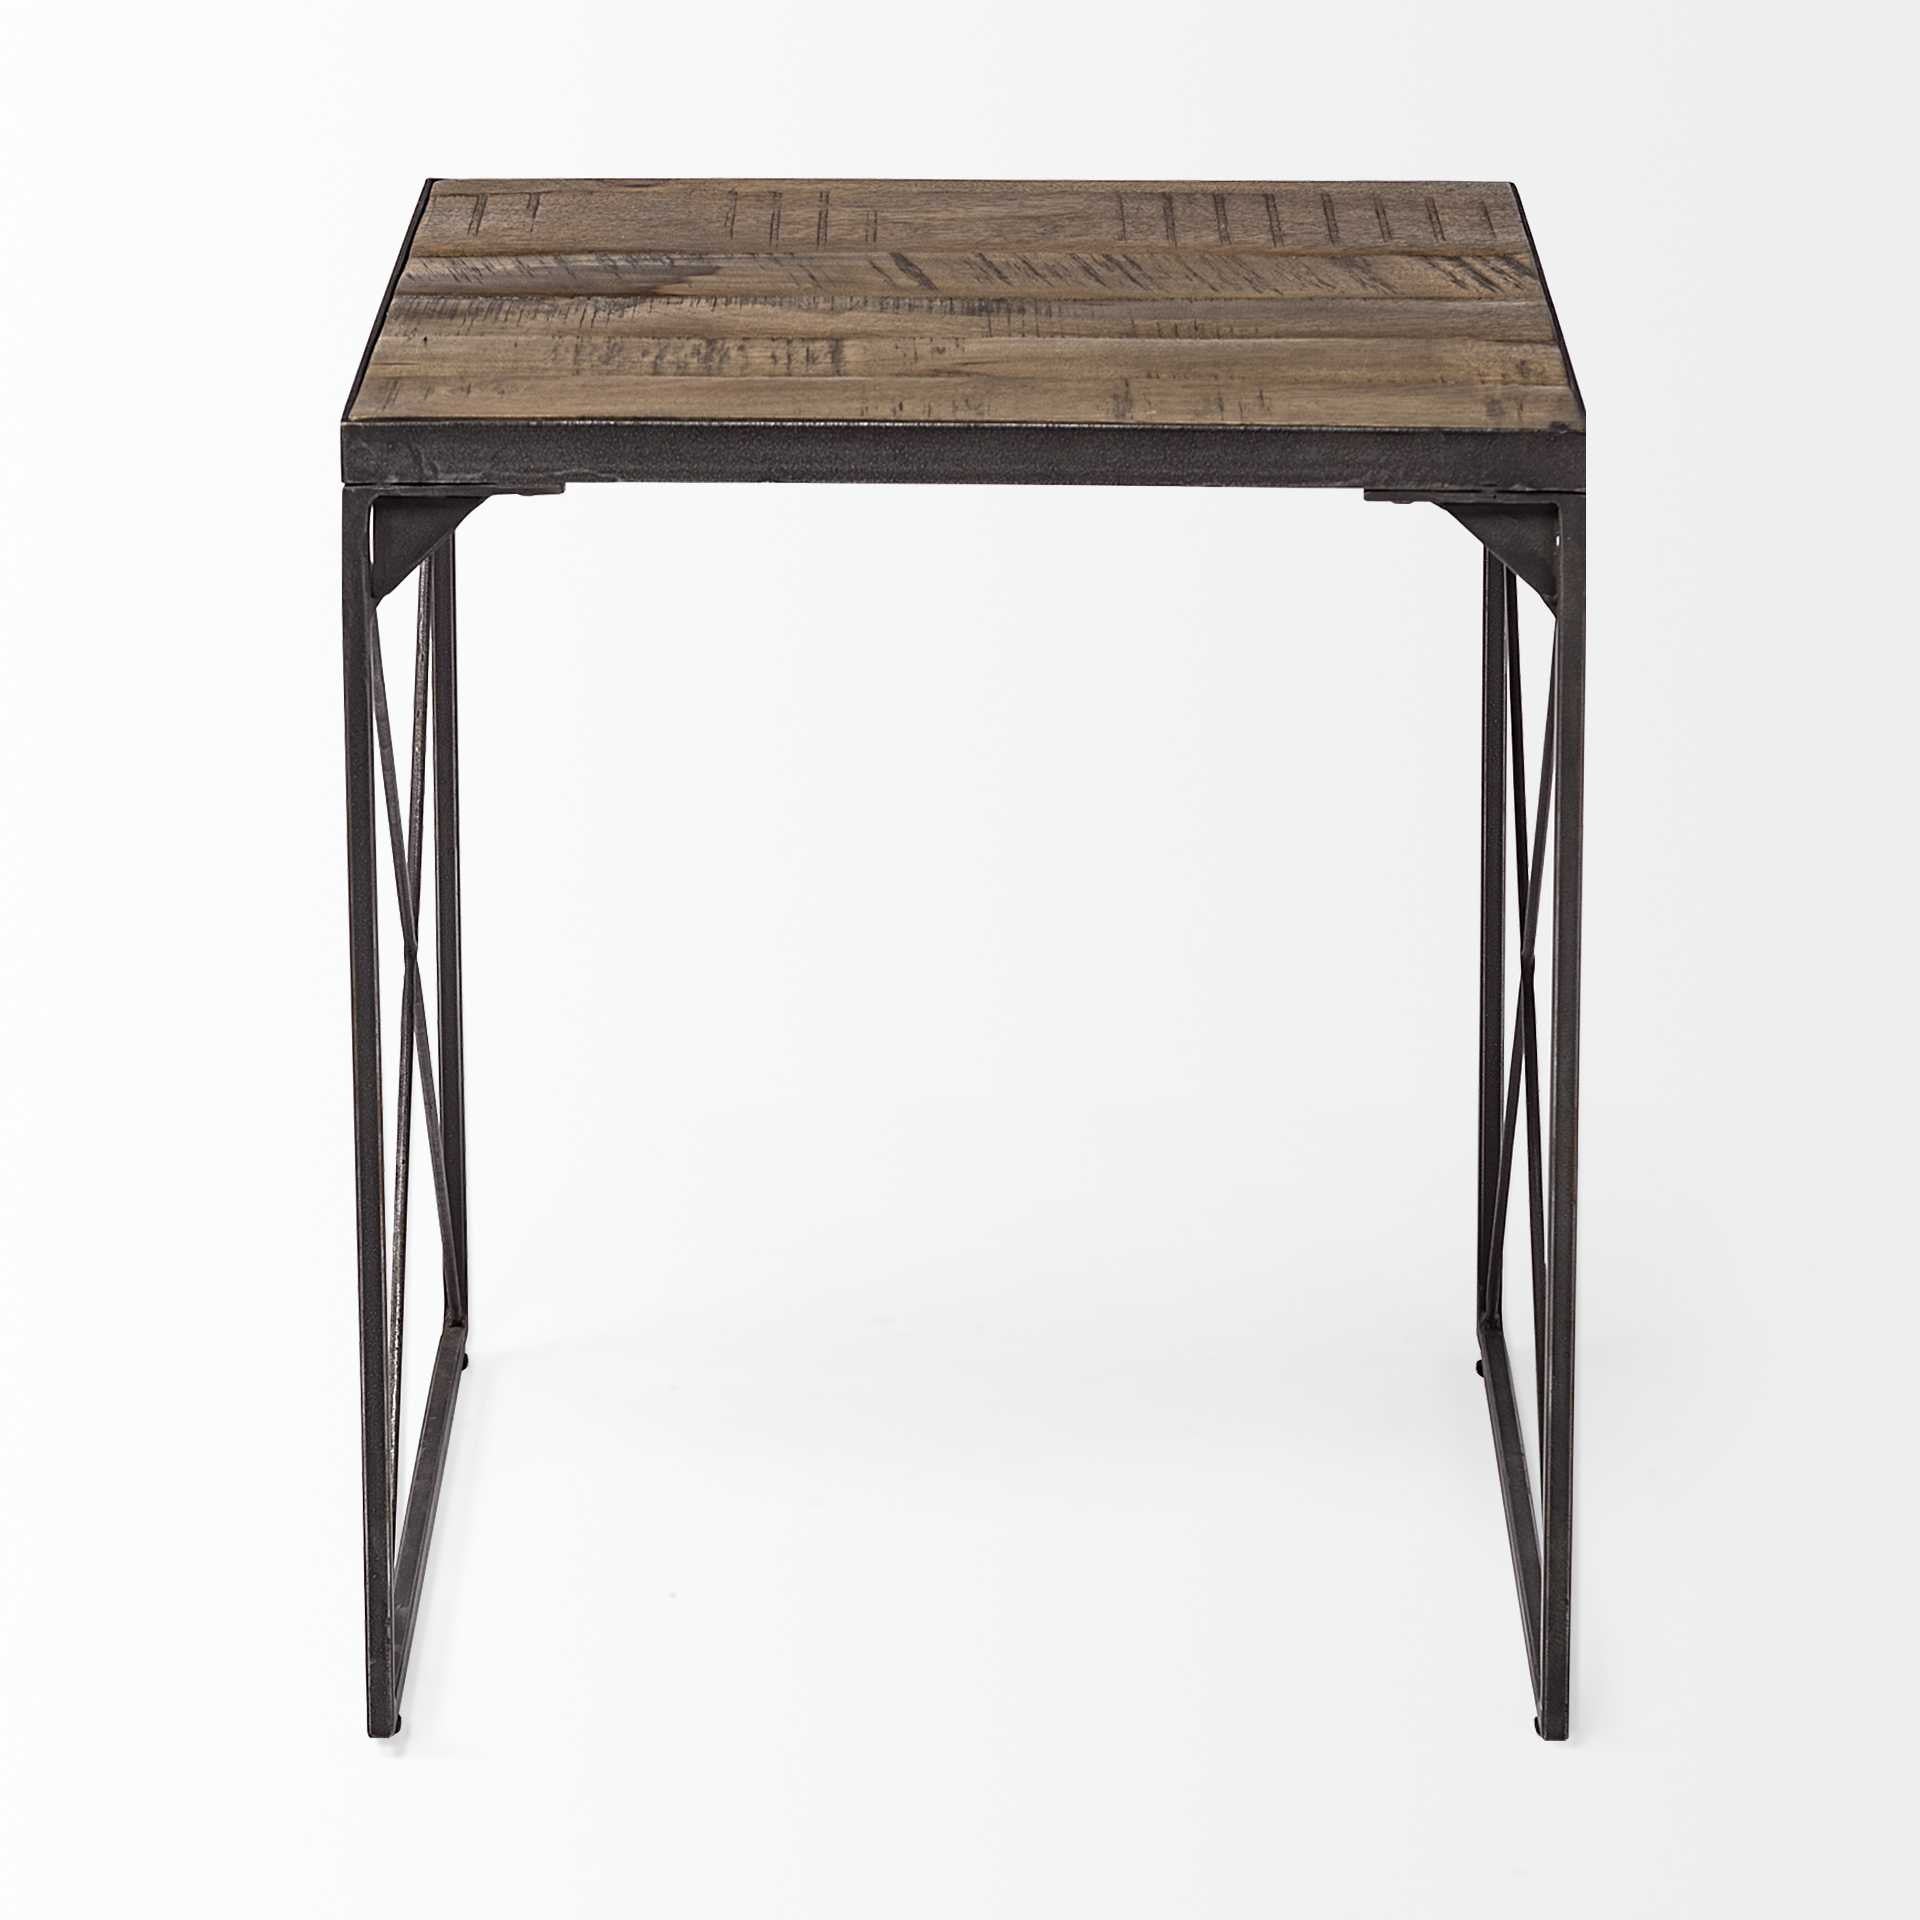 Medium Brown Wood Side Table With Square Top And Iron Cross Braced